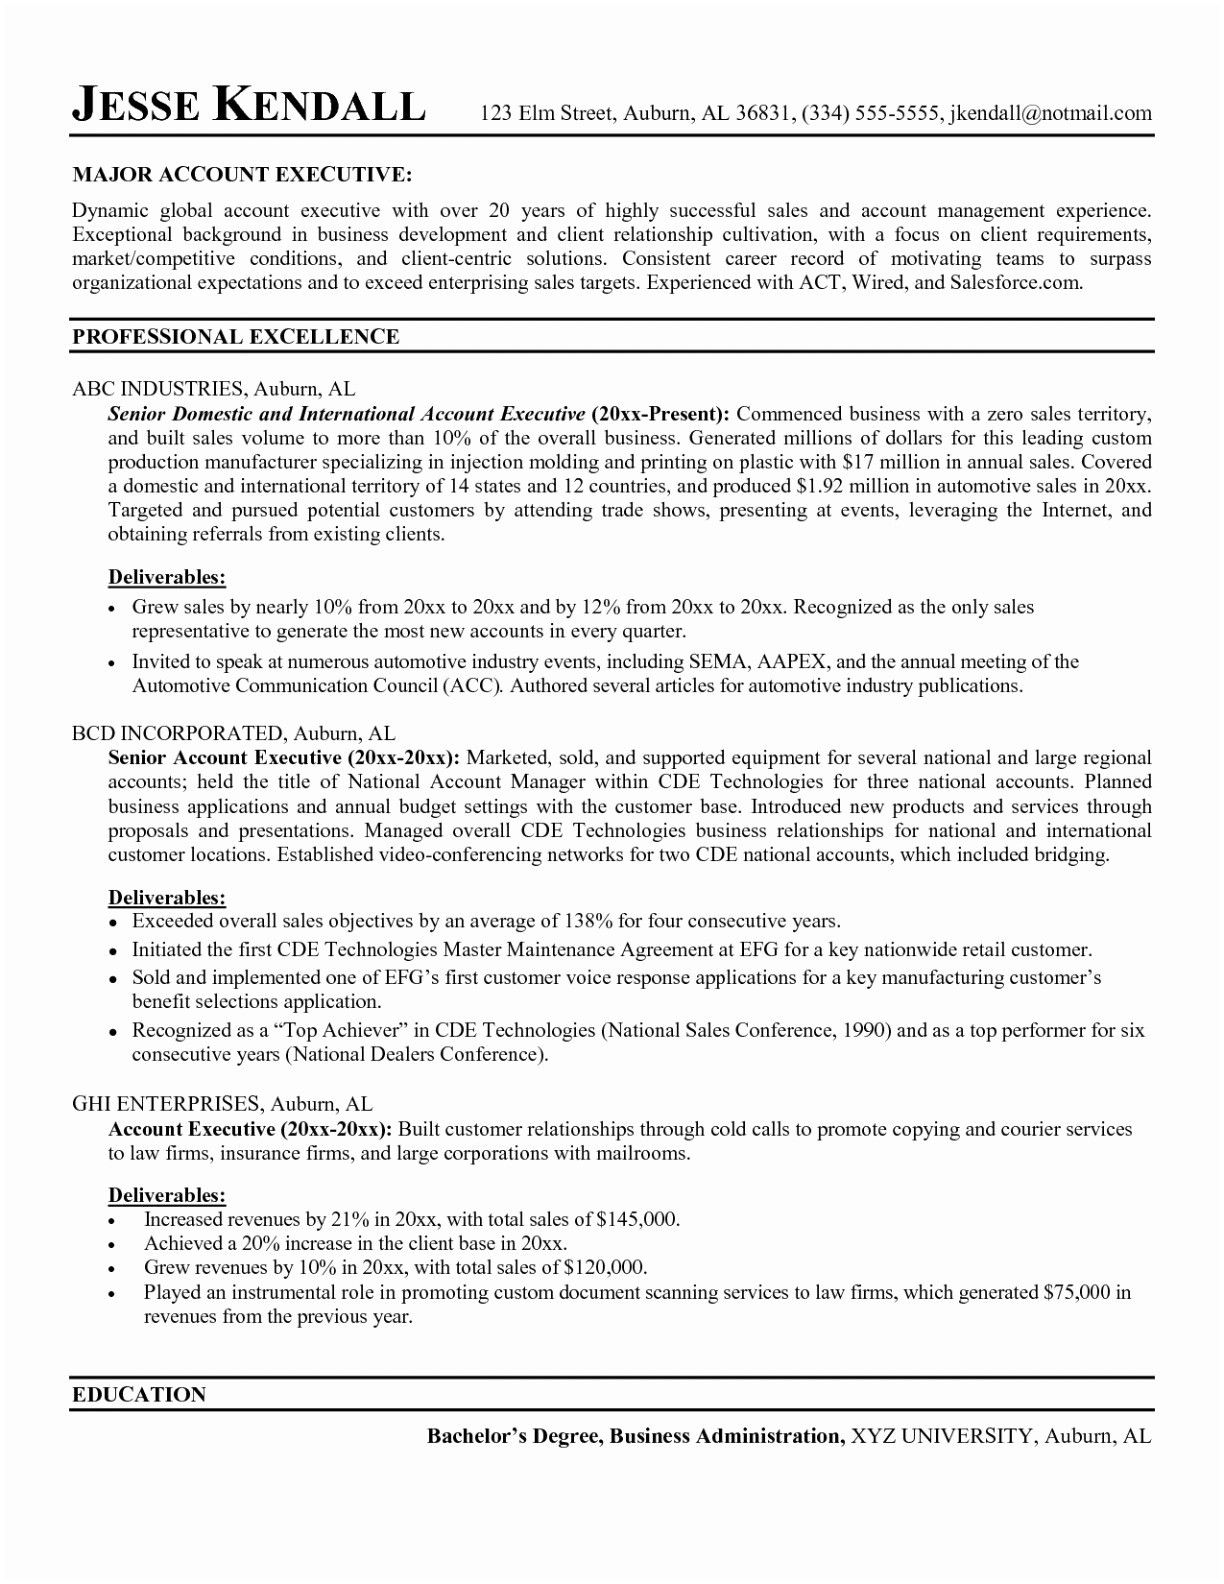 best business resume inspirational best resumes for sales executives resume resume examples rmqnq6nazd of best business resume